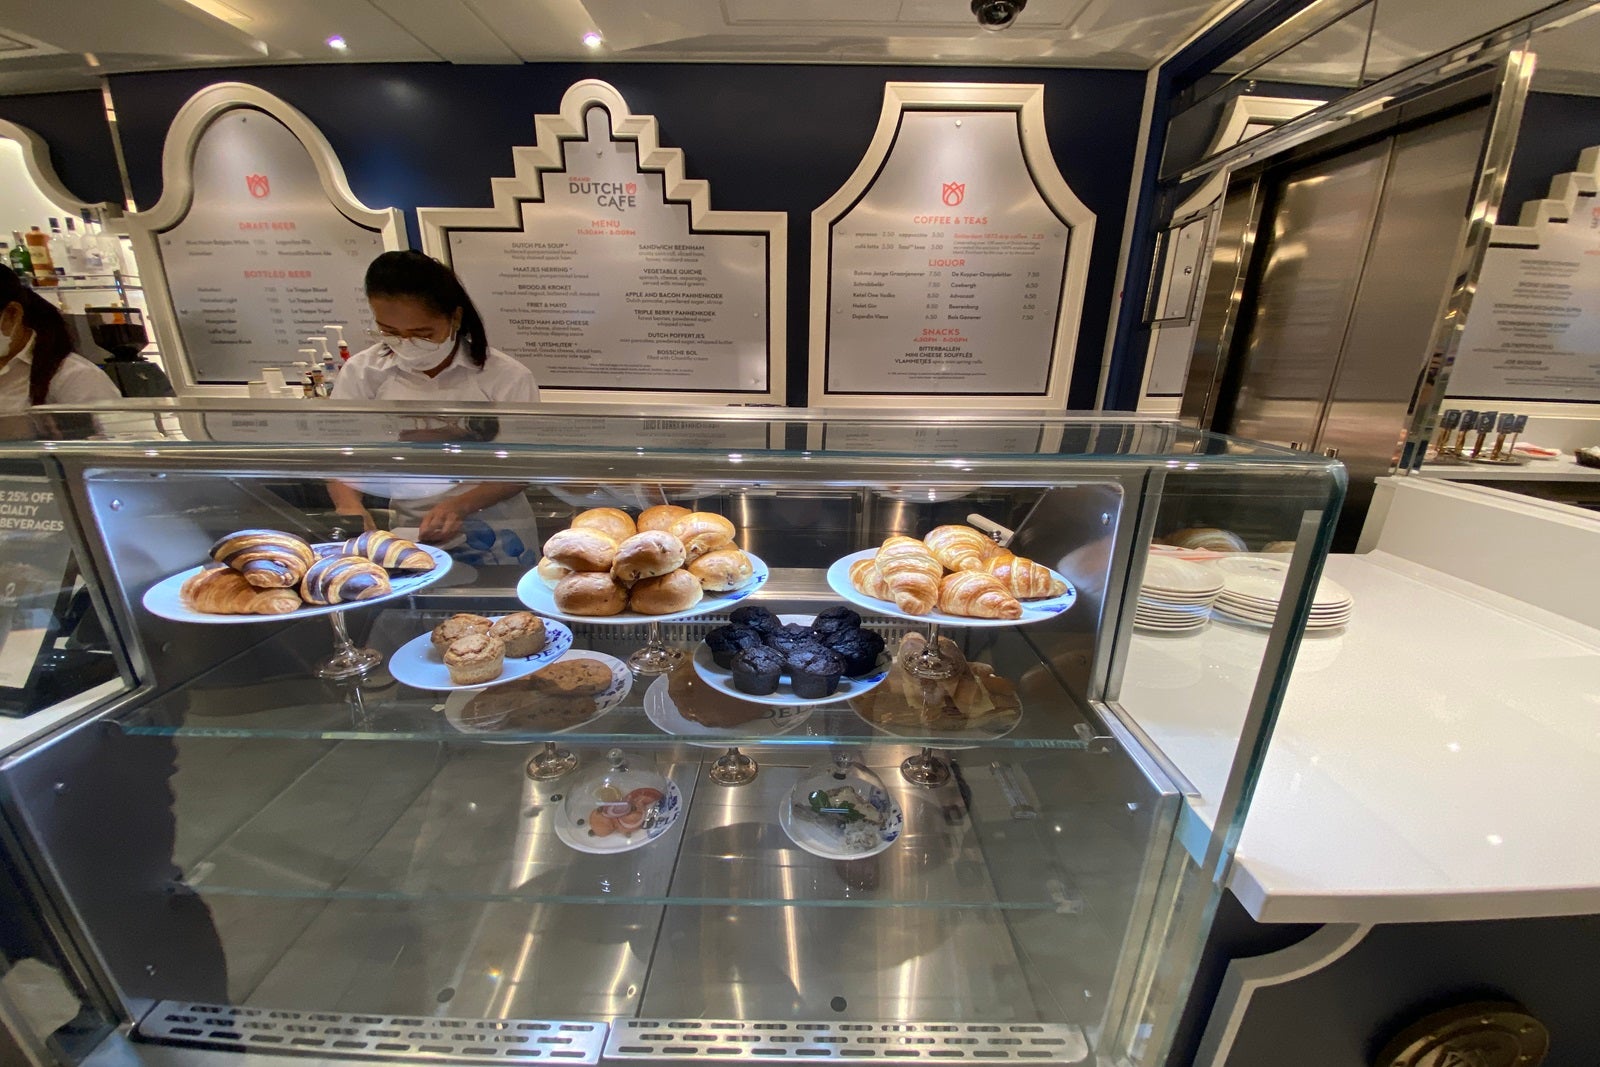 A cafe counter with baked goods